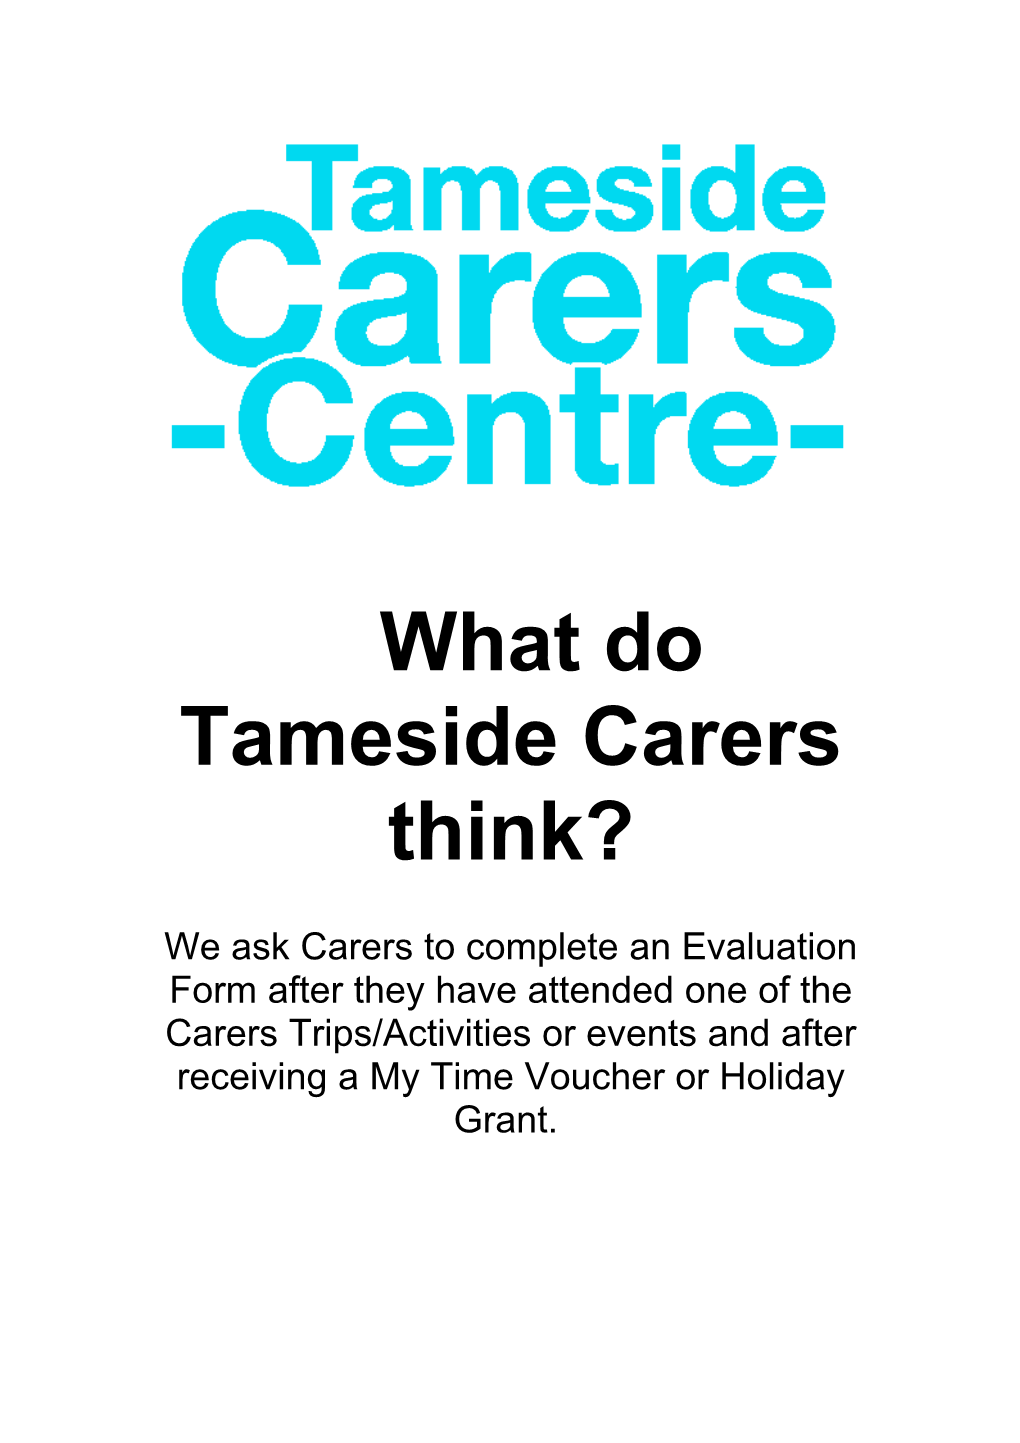 What Do Tameside Carers Think?